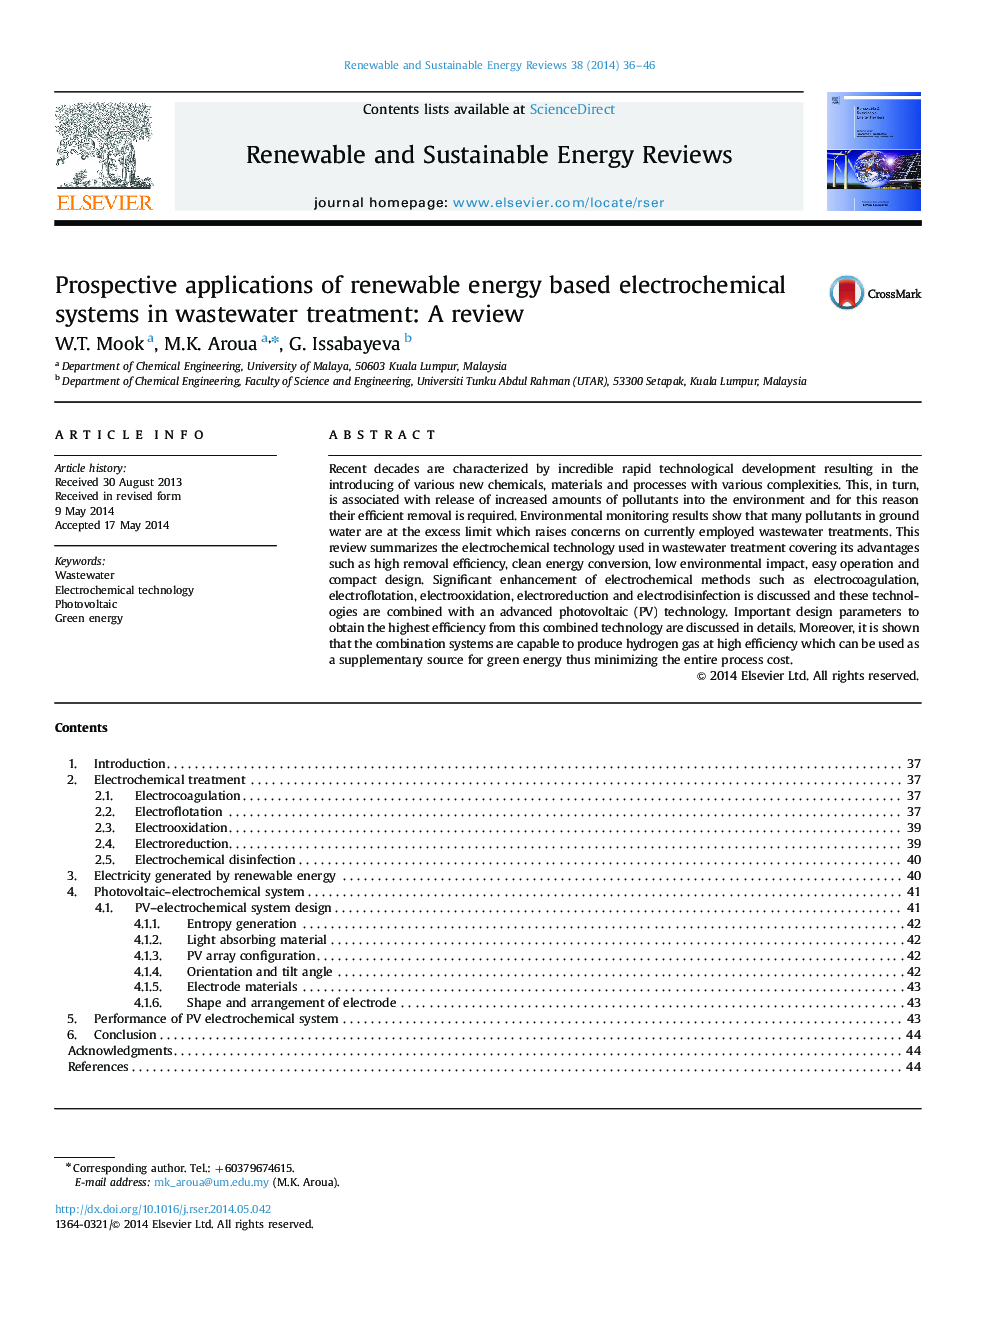 Prospective applications of renewable energy based electrochemical systems in wastewater treatment: A review